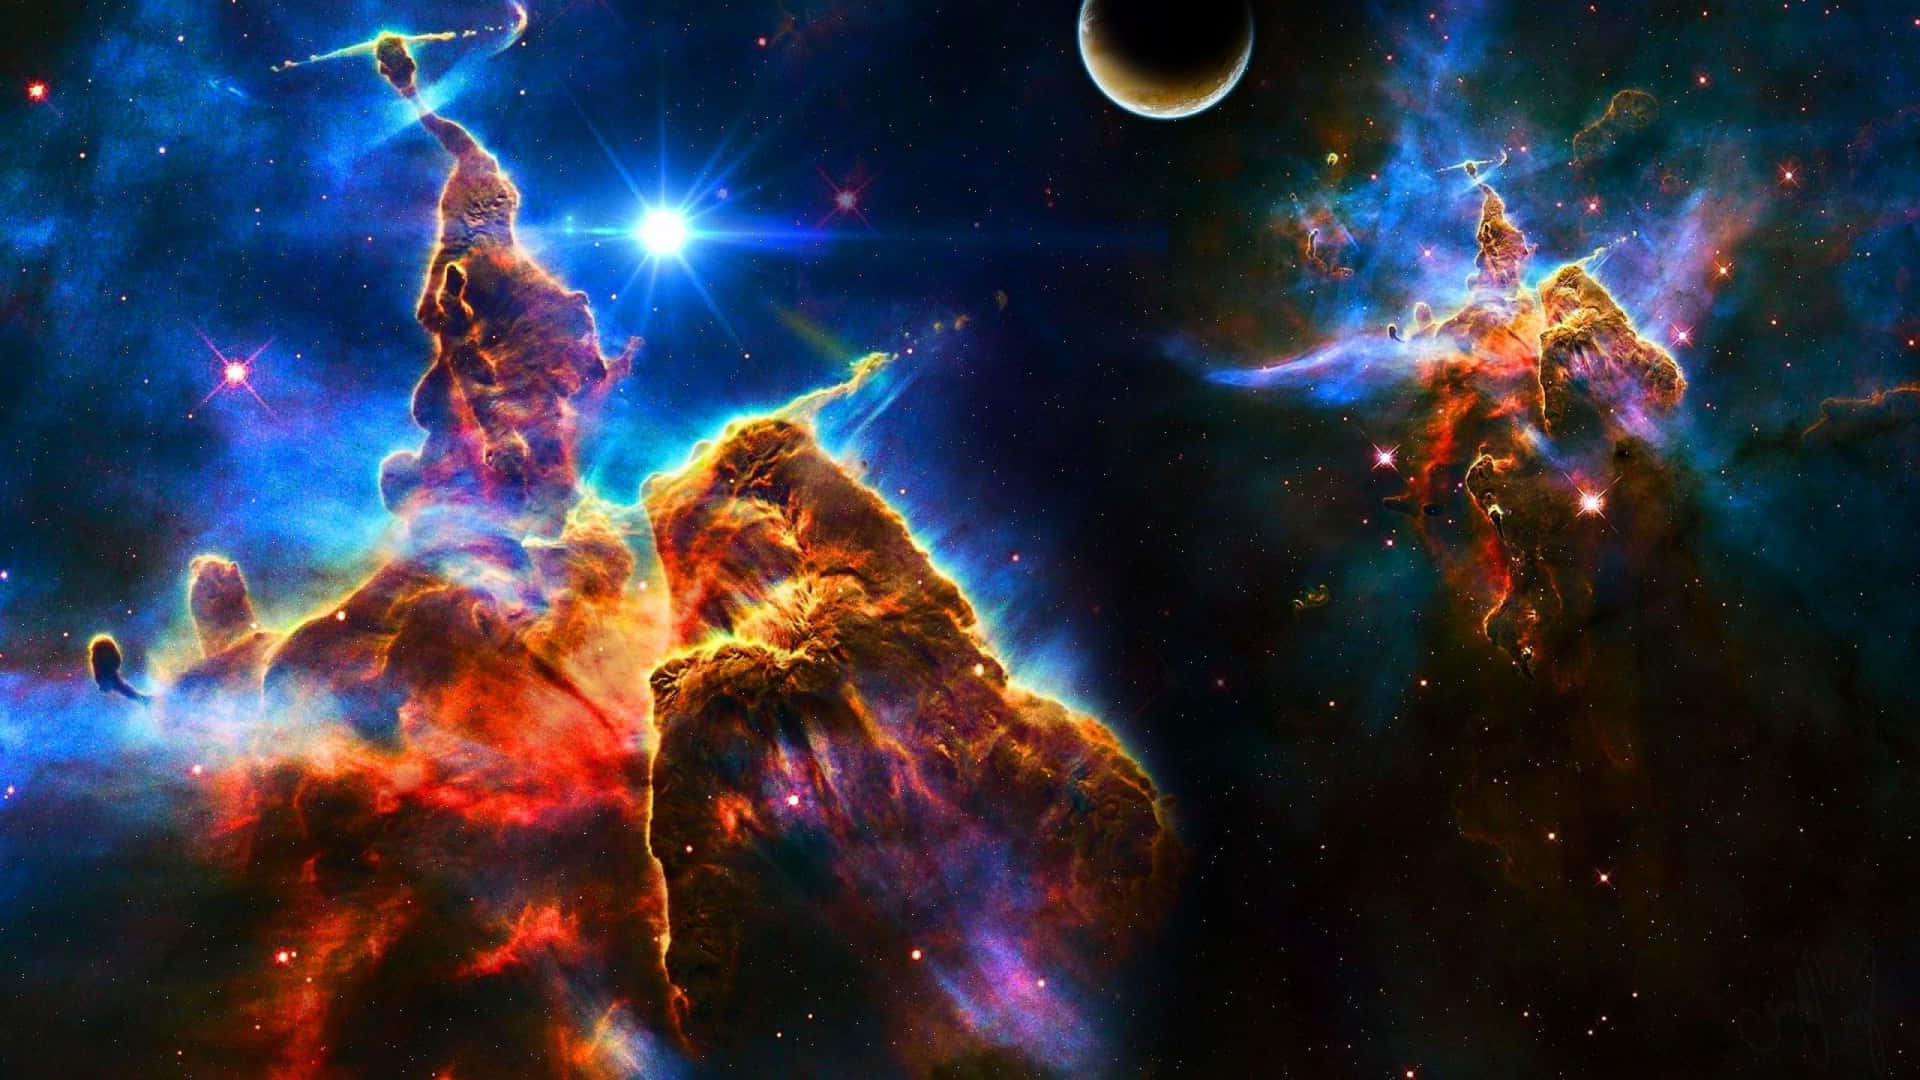 'Explore the mysteries of the universe with a spectacular space desktop background'